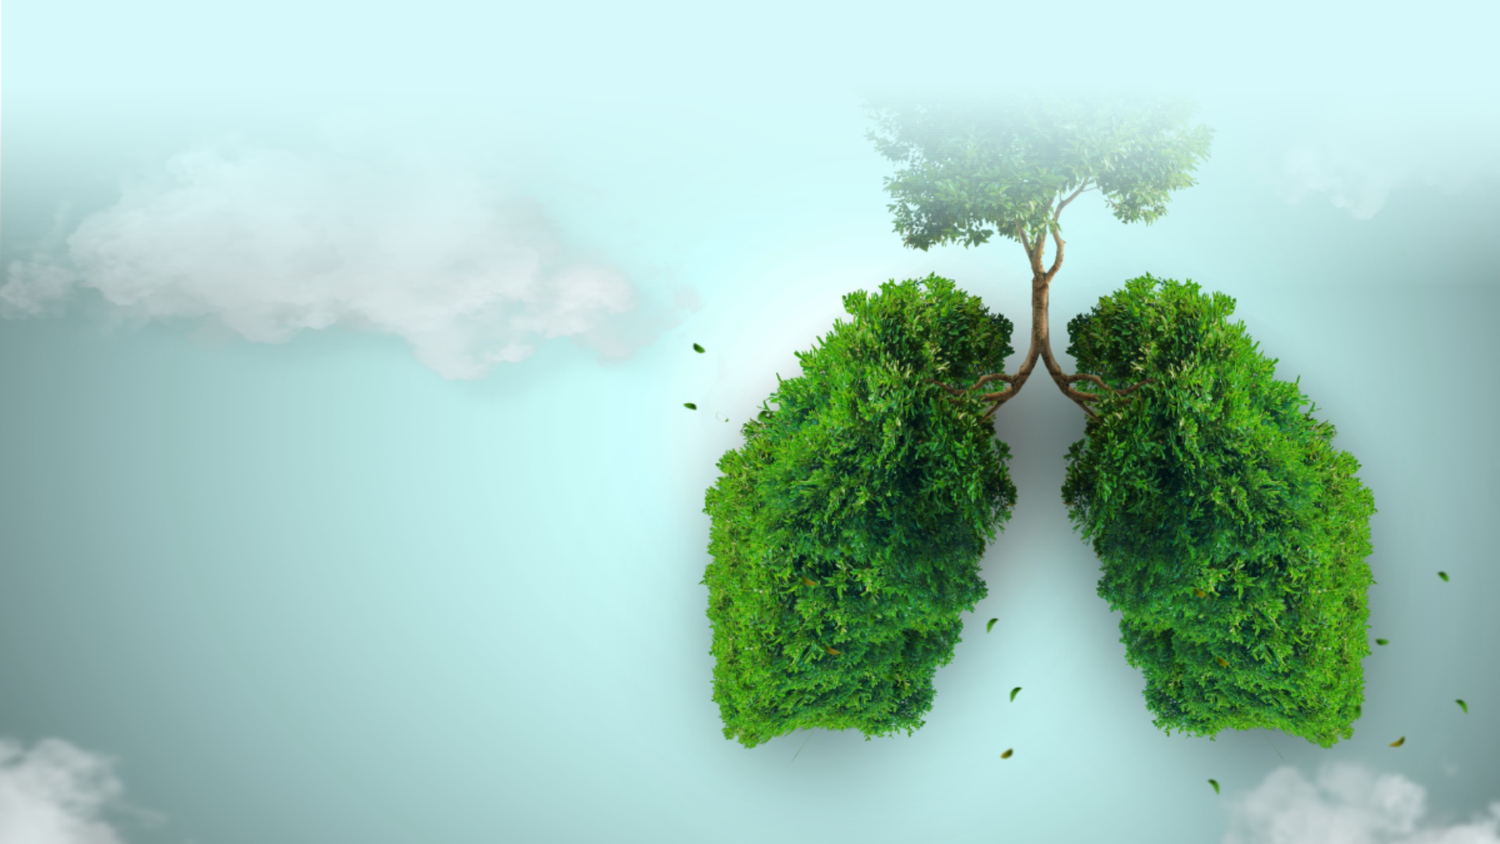 World COPD Day 2023: While we breathe, we will hope